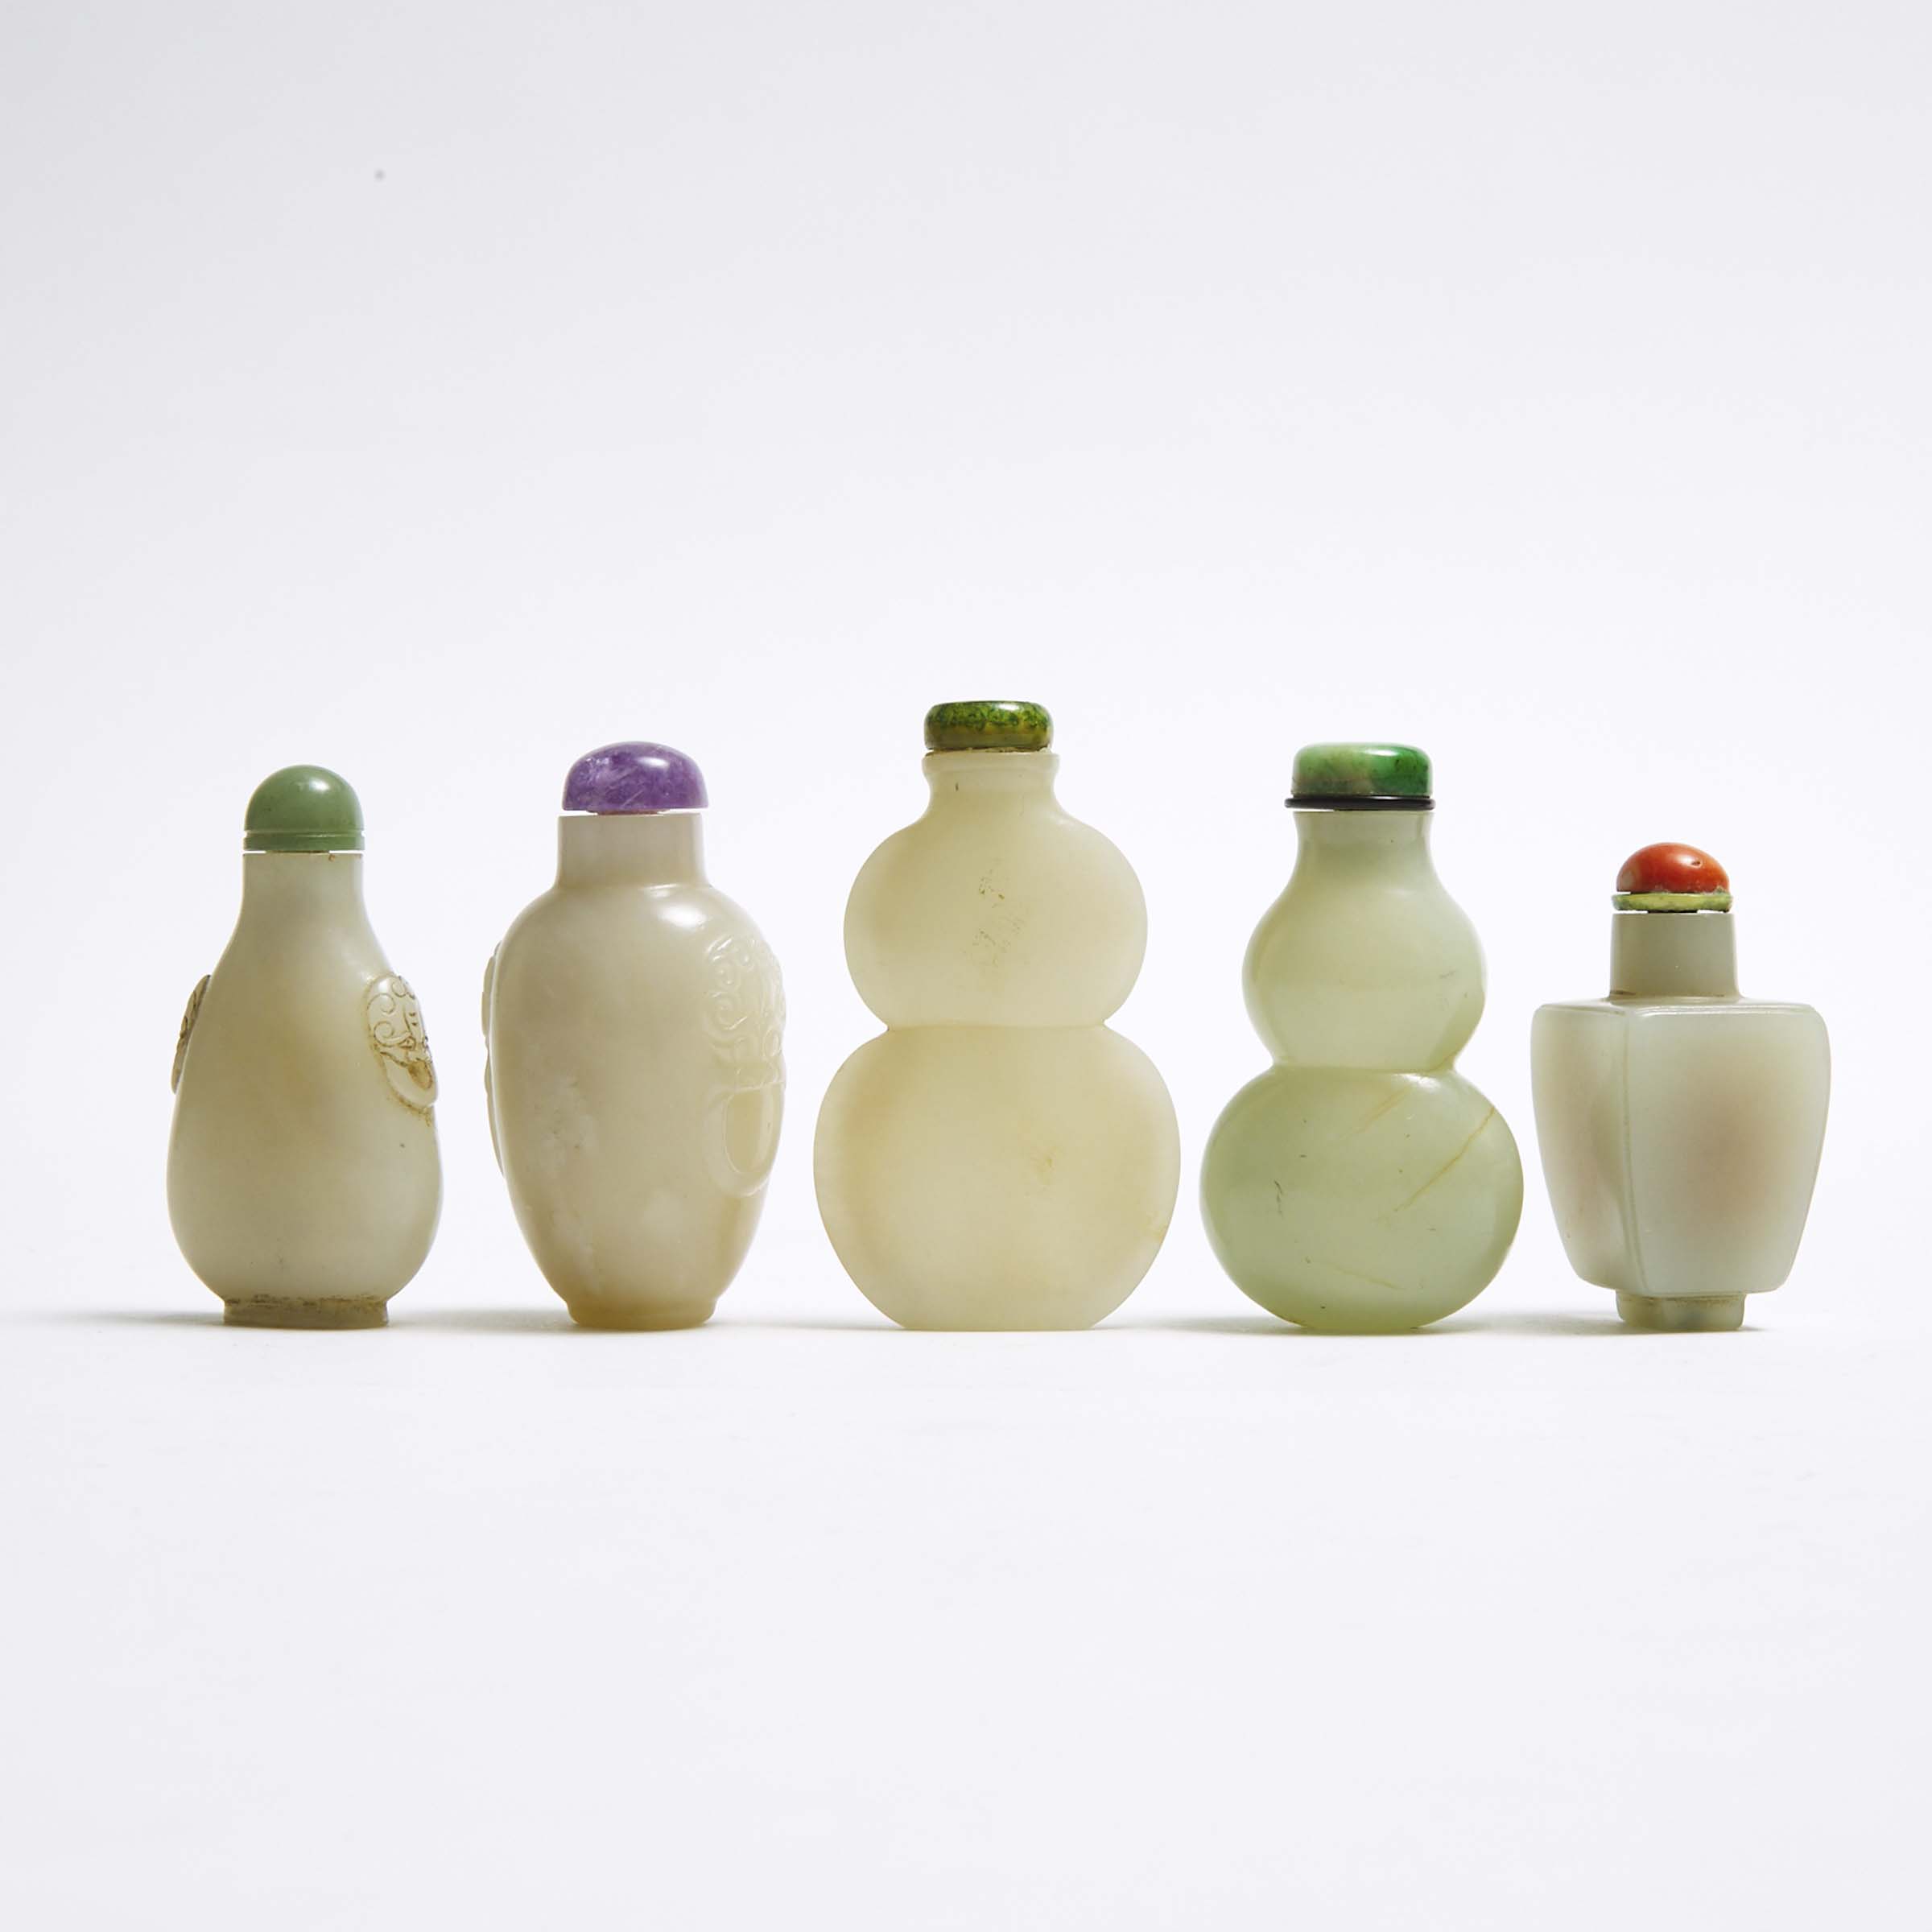 A Group of Five White Jade Snuff Bottles, Qing Dynasty